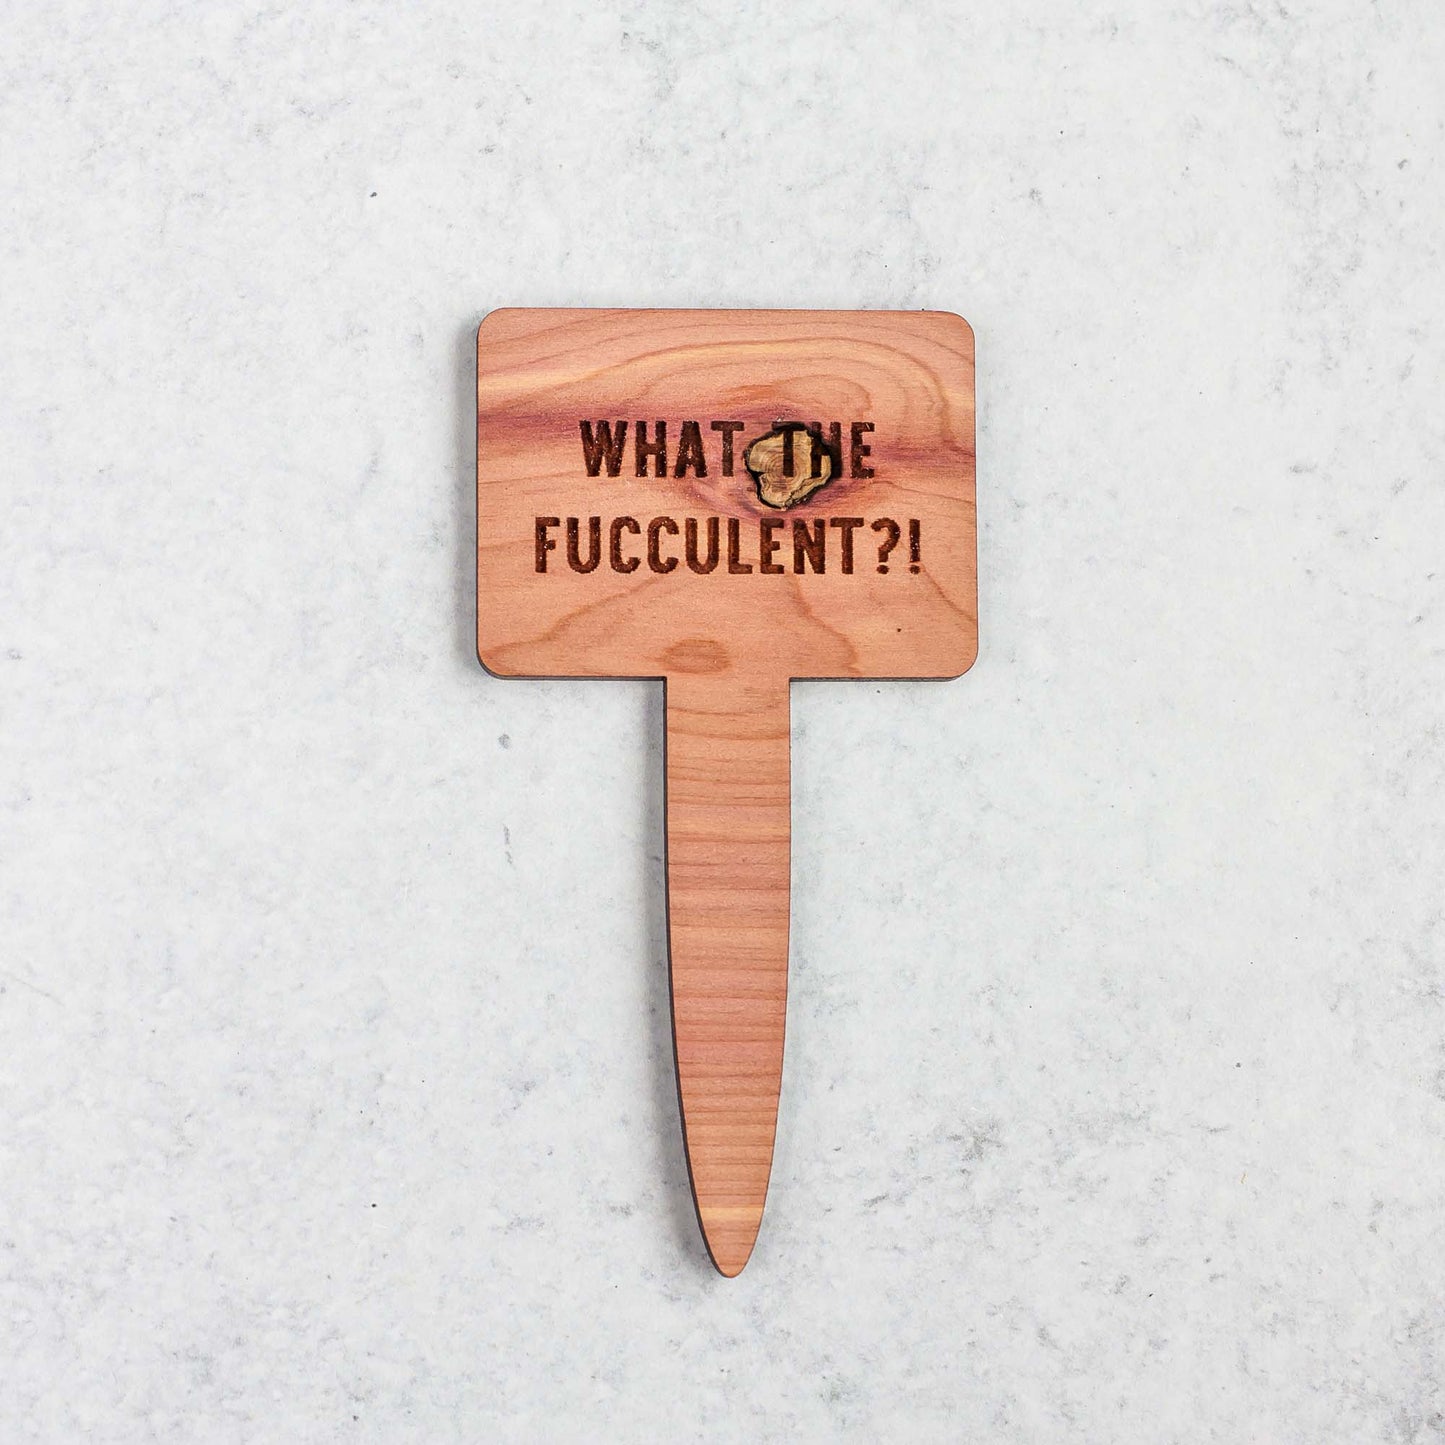 Funny Plant Markers - Laser Cut & Laser Engraved Cedar Wood - "What The Fucculent?!" - by LeeMo Designs in Bend, Oregon